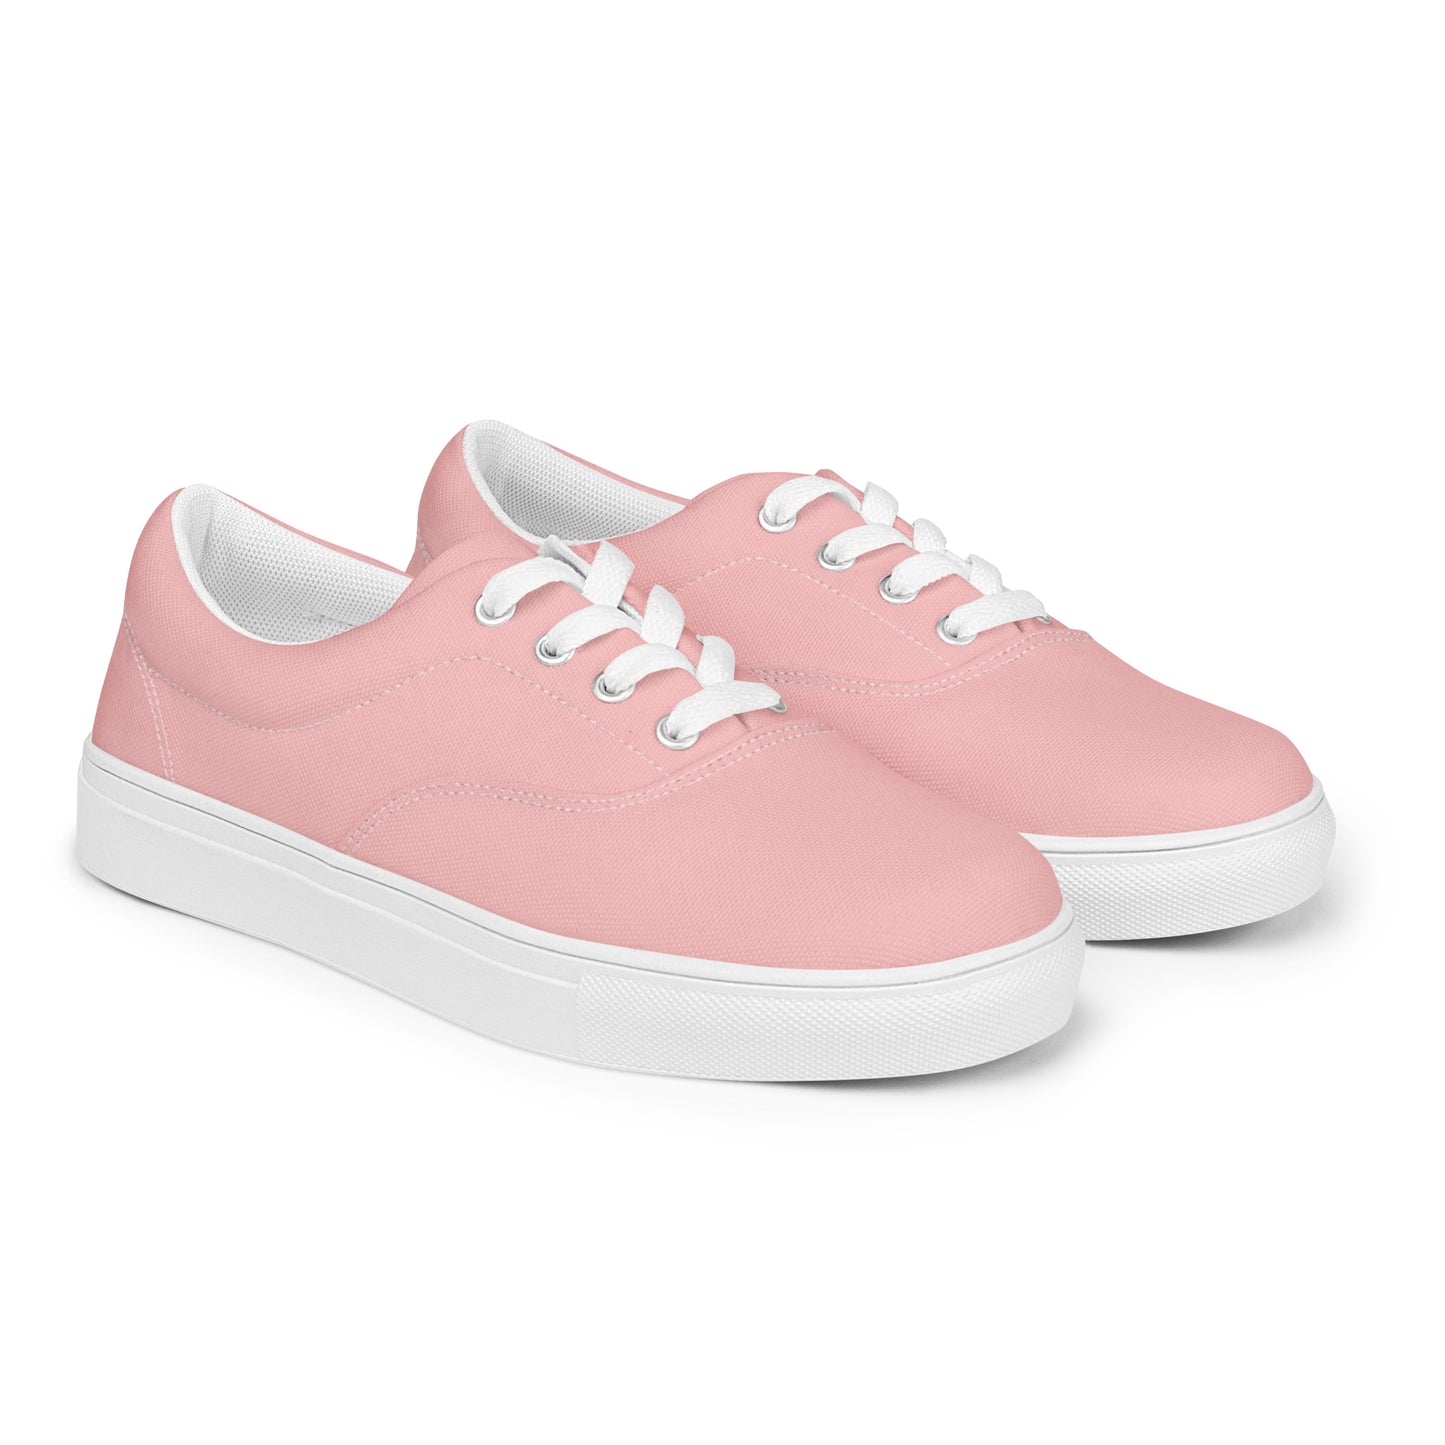 Women’s Your Pink Lace-up Canvas Shoes